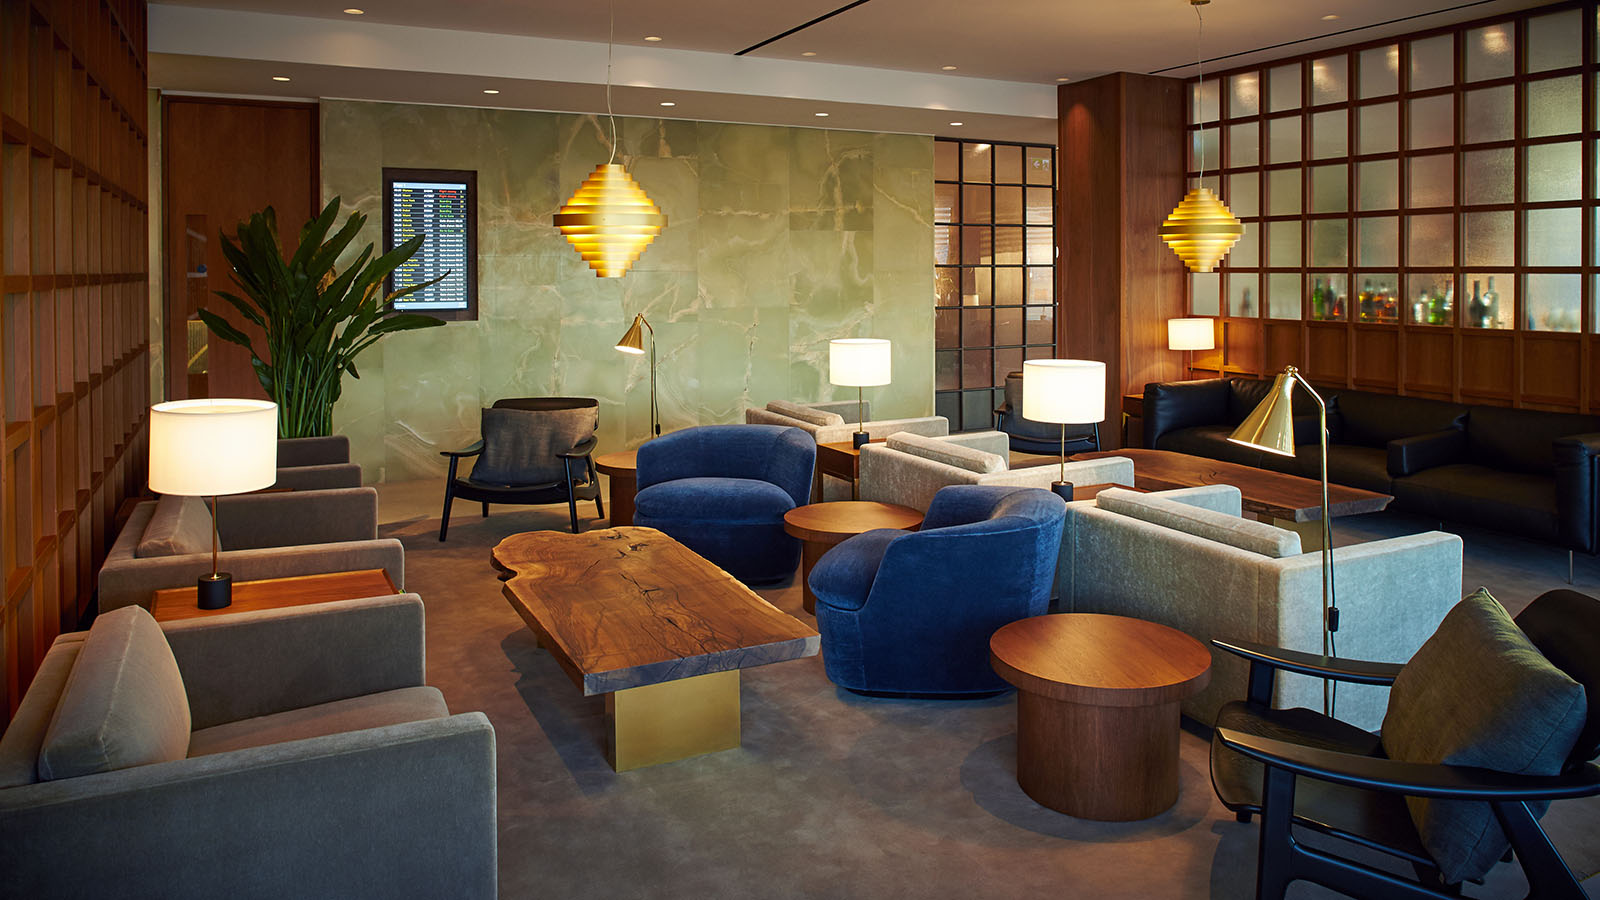 Seating in the Cathay Pacific First Class Lounge at London Heathrow